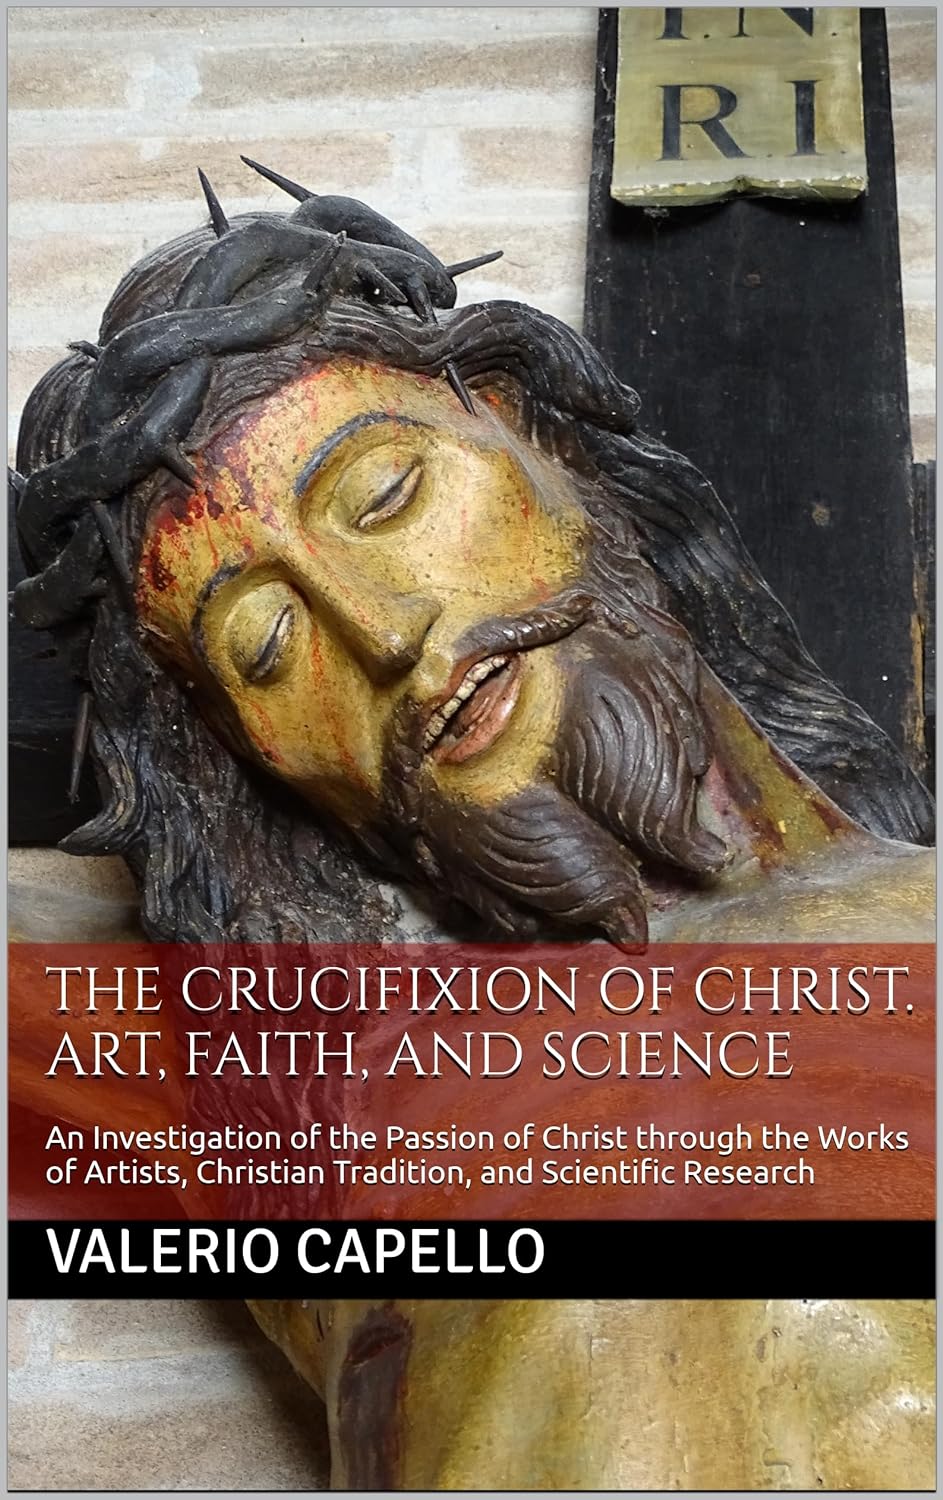 The Crucifixion of Christ. Art, Faith, and Science. An Investigation of the Passion of Christ through the Works of Artists, Christian Tradition, and Scientific Research